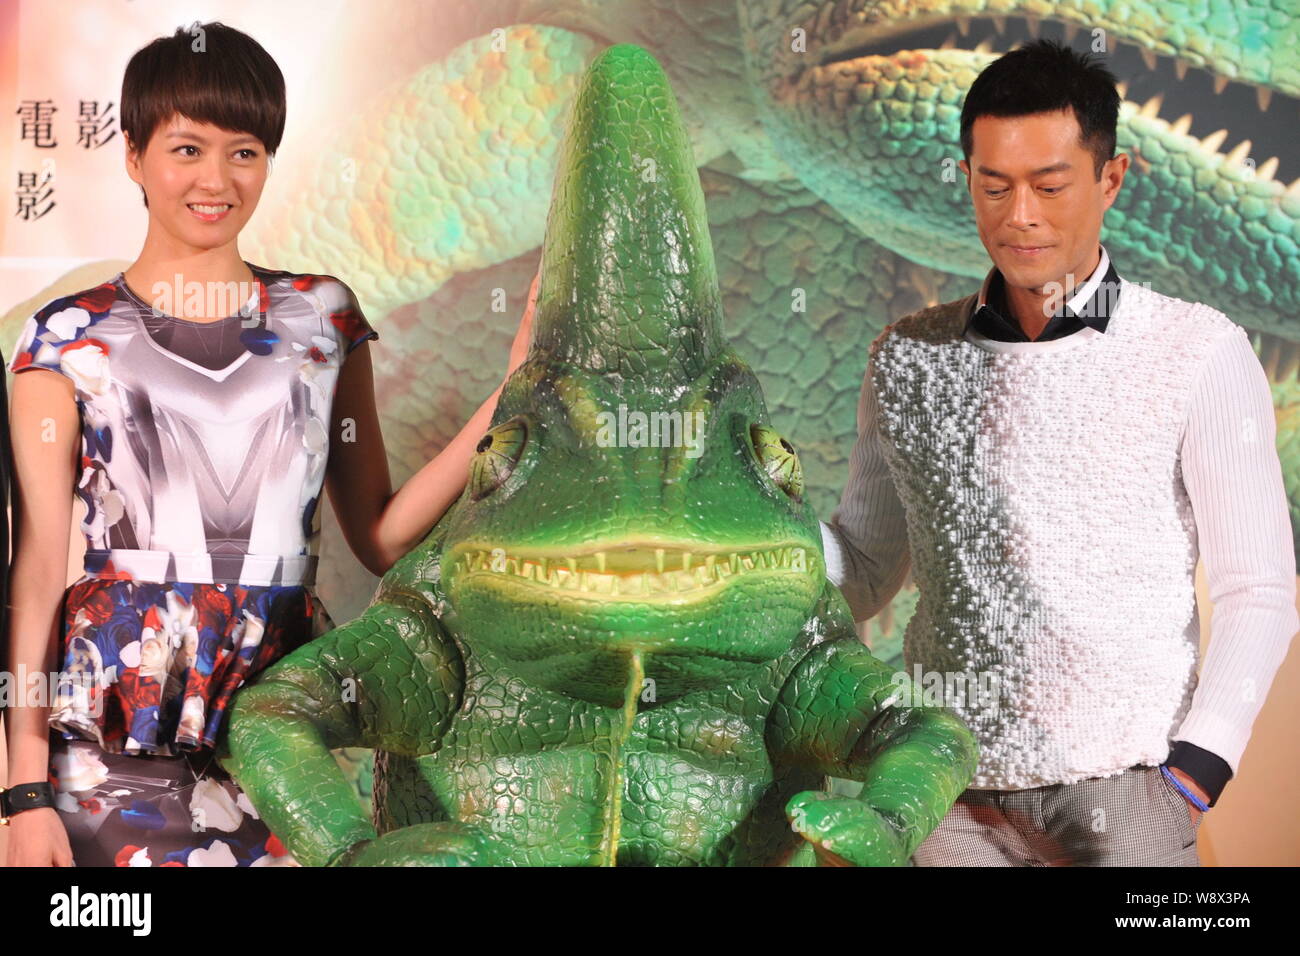 Hong Kong actress Gigi Leung, left, and Hong Kong actor Louis Koo pose with a toy chameleon during the premiere for their new film, Aberdeen, in Beiji Stock Photo